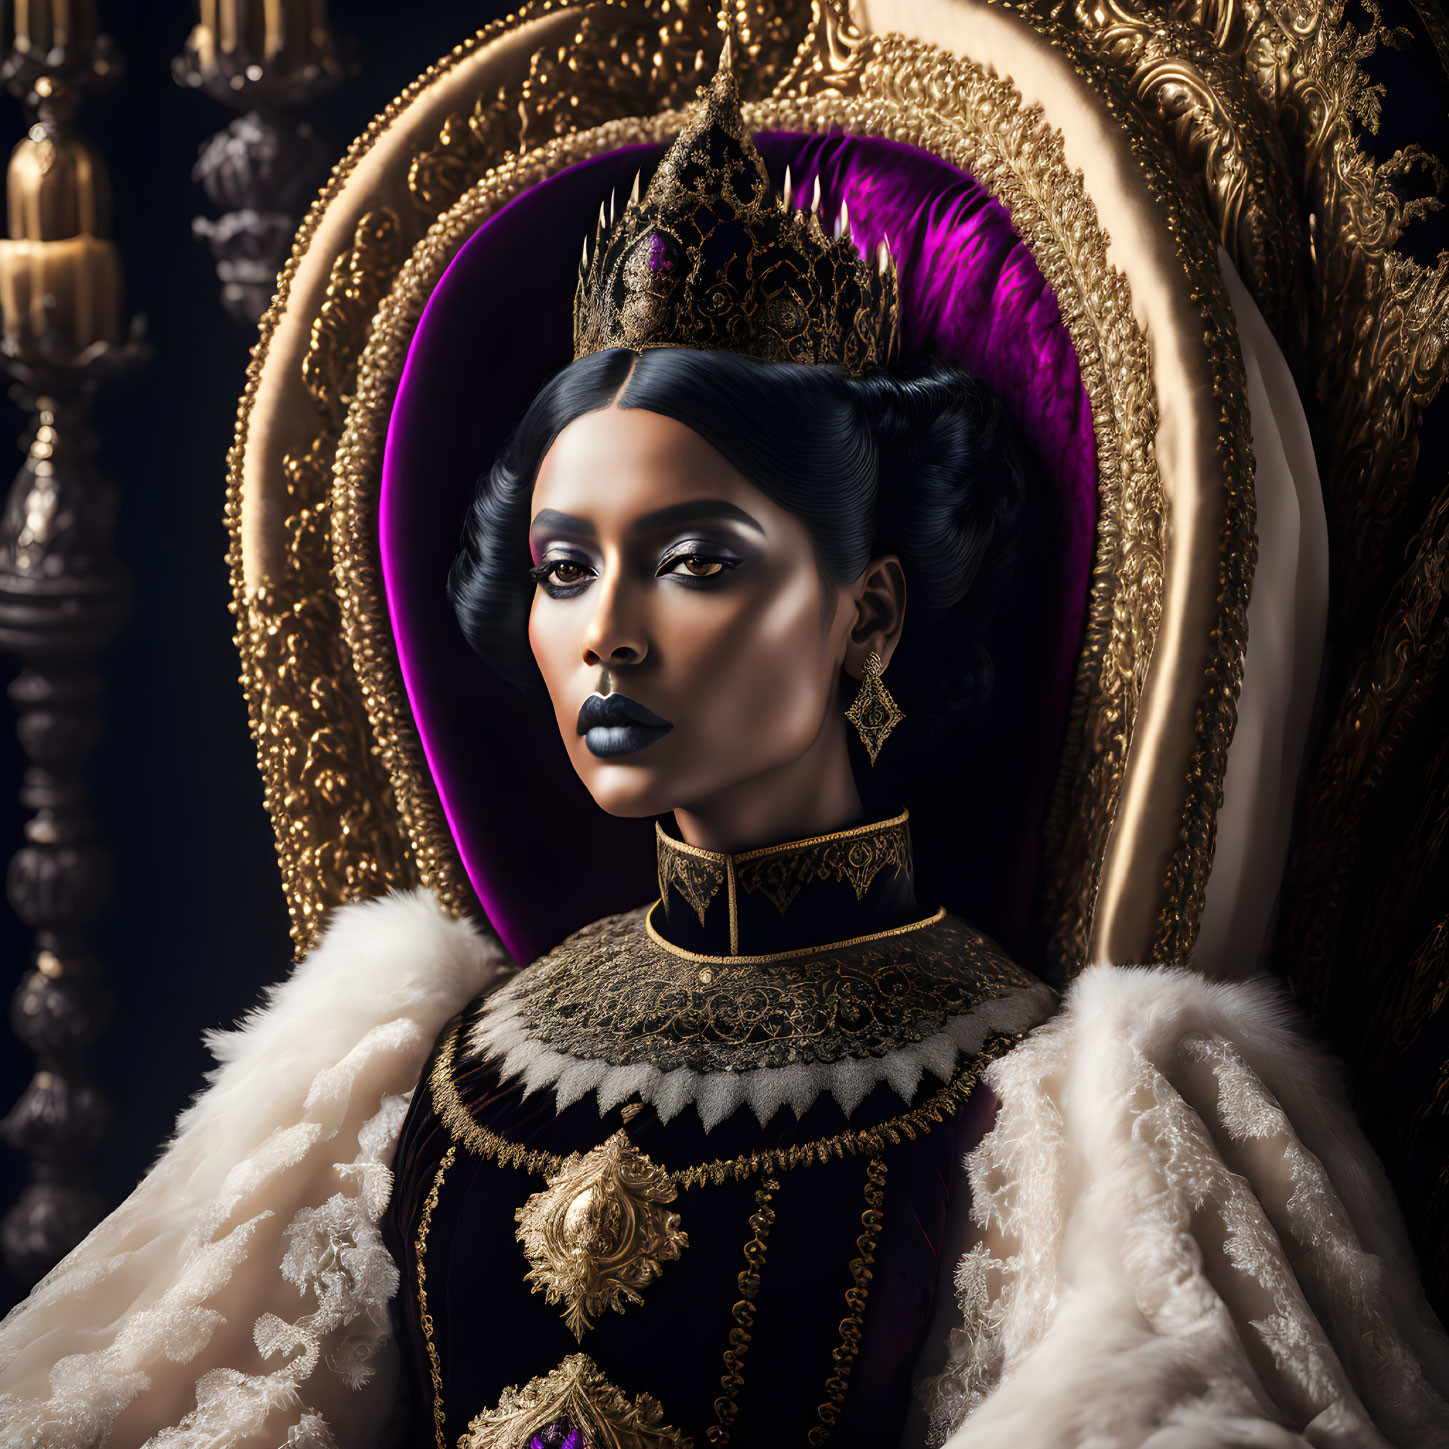 Regal woman in dark makeup with crown and fur attire on purple throne